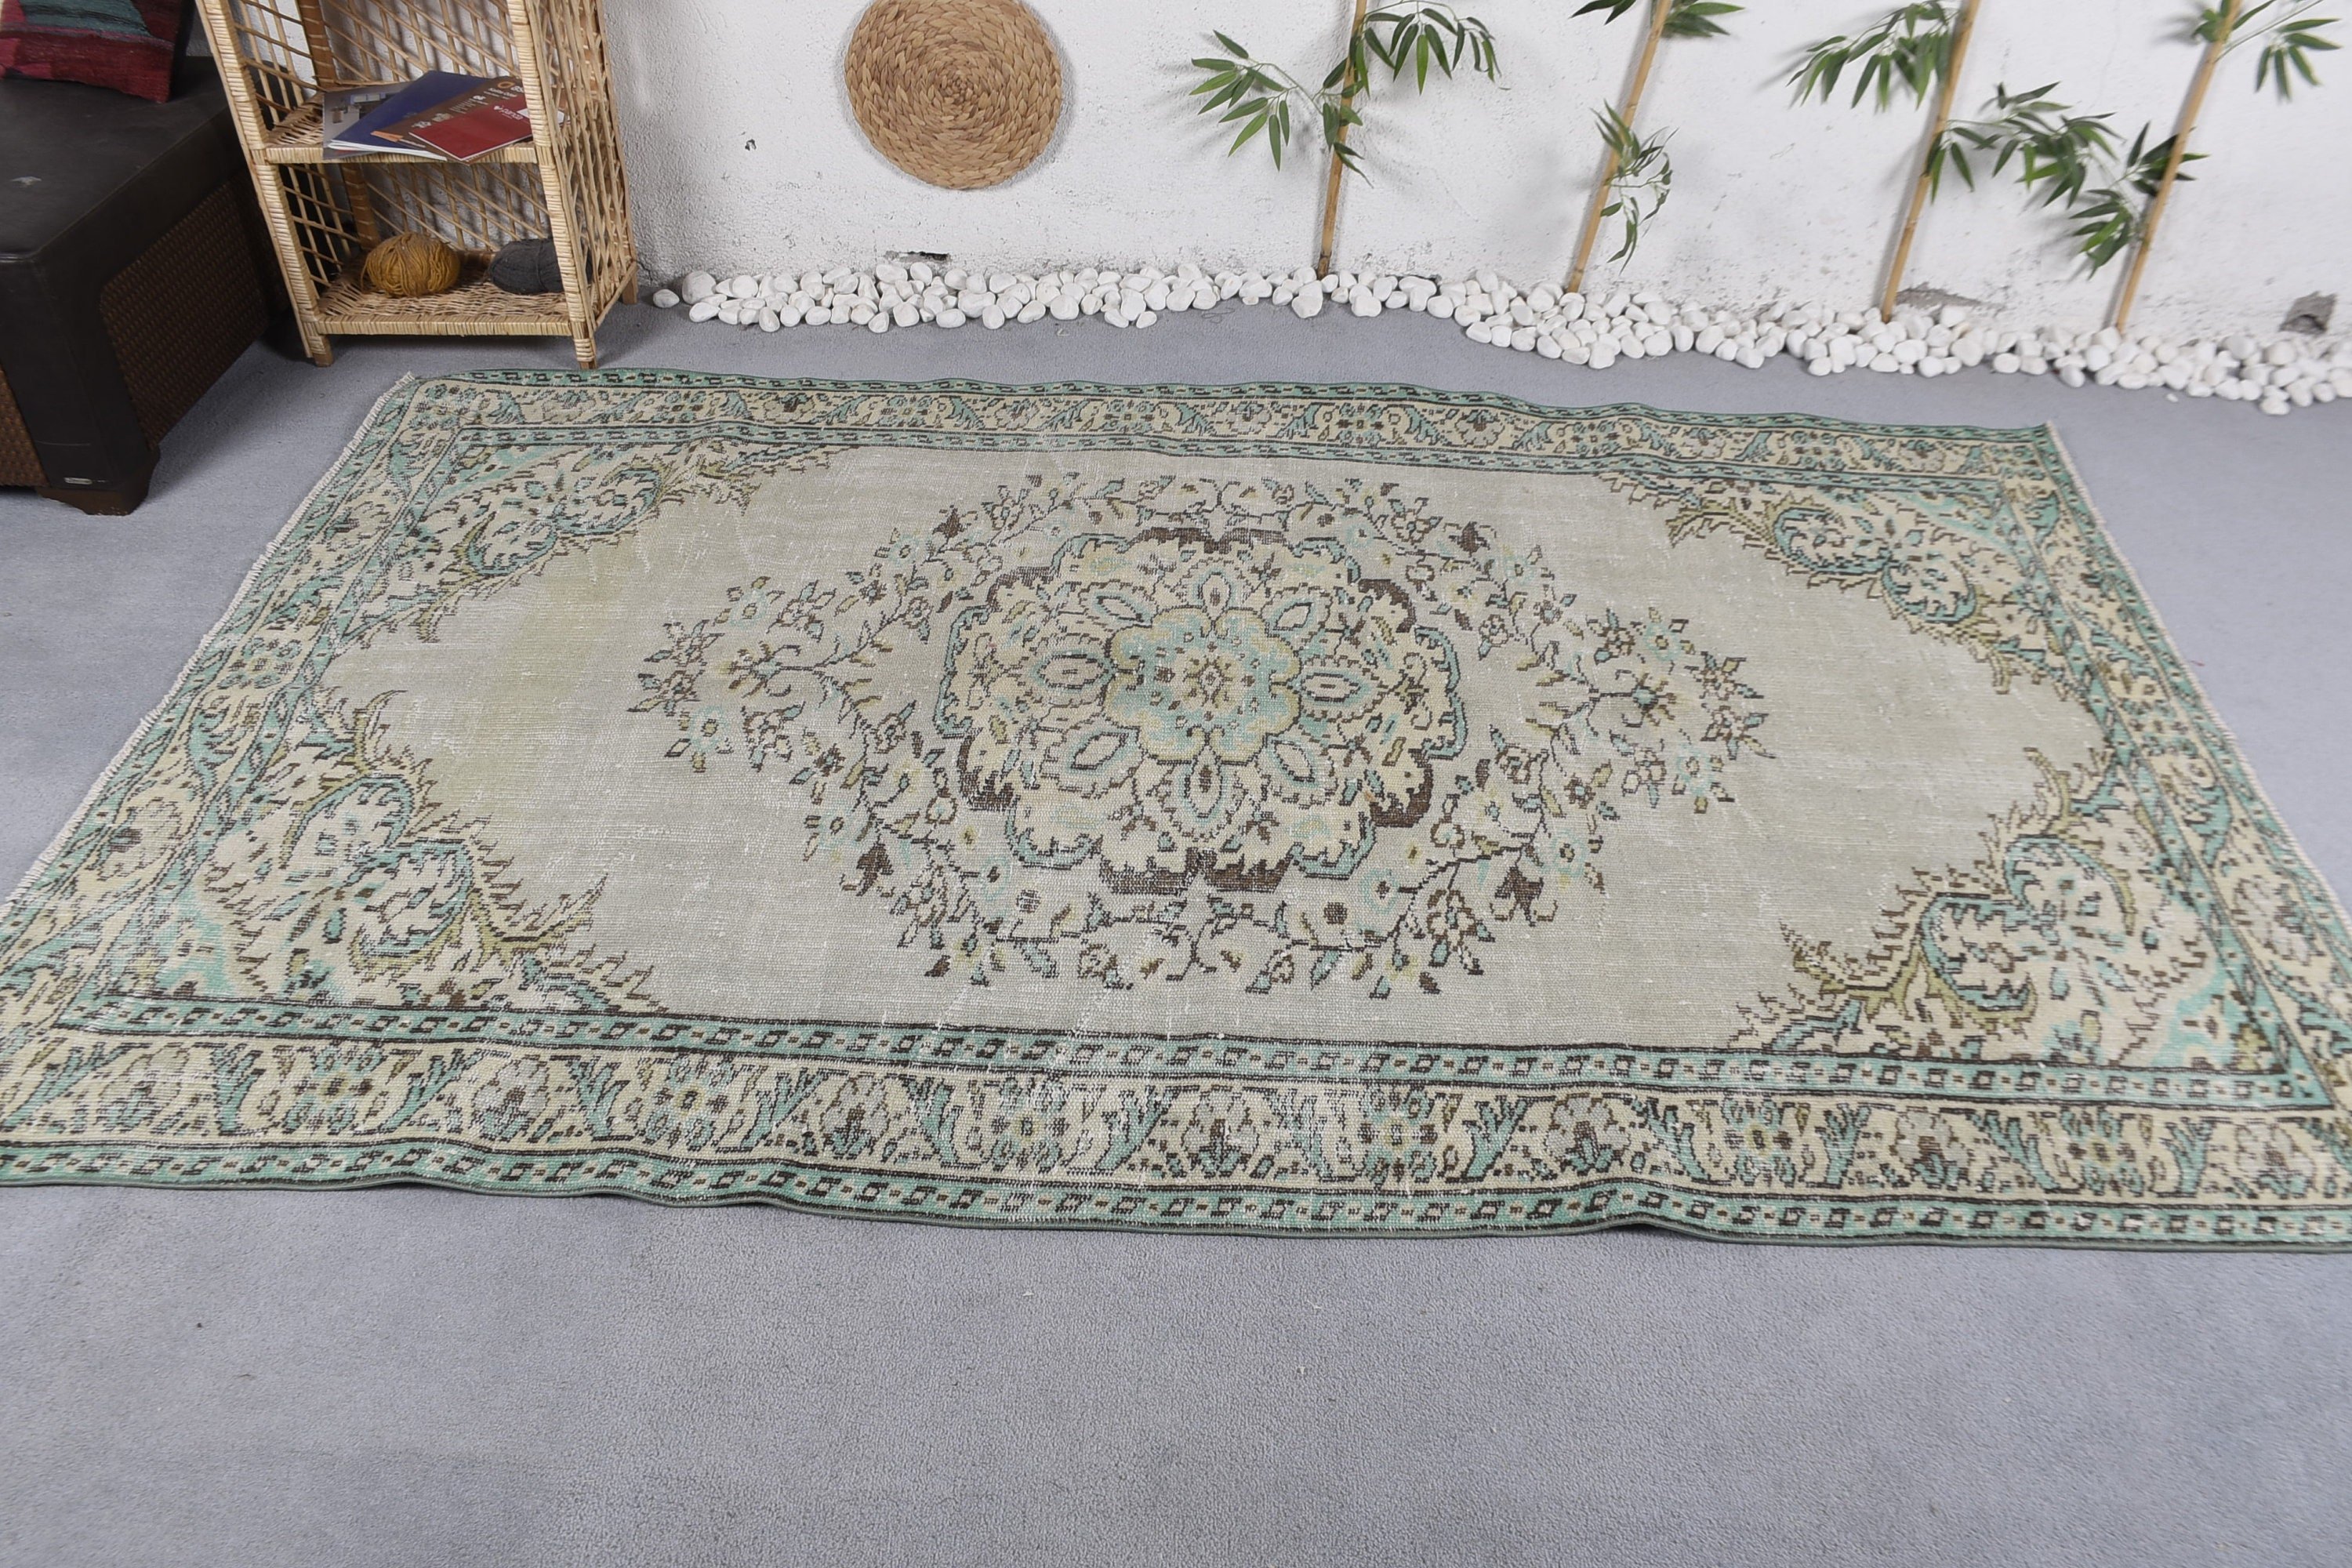 Rugs for Salon, Salon Rug, Green Moroccan Rug, Anatolian Rug, Turkish Rugs, Vintage Rugs, Bedroom Rugs, 5.4x8.6 ft Large Rugs, Antique Rug